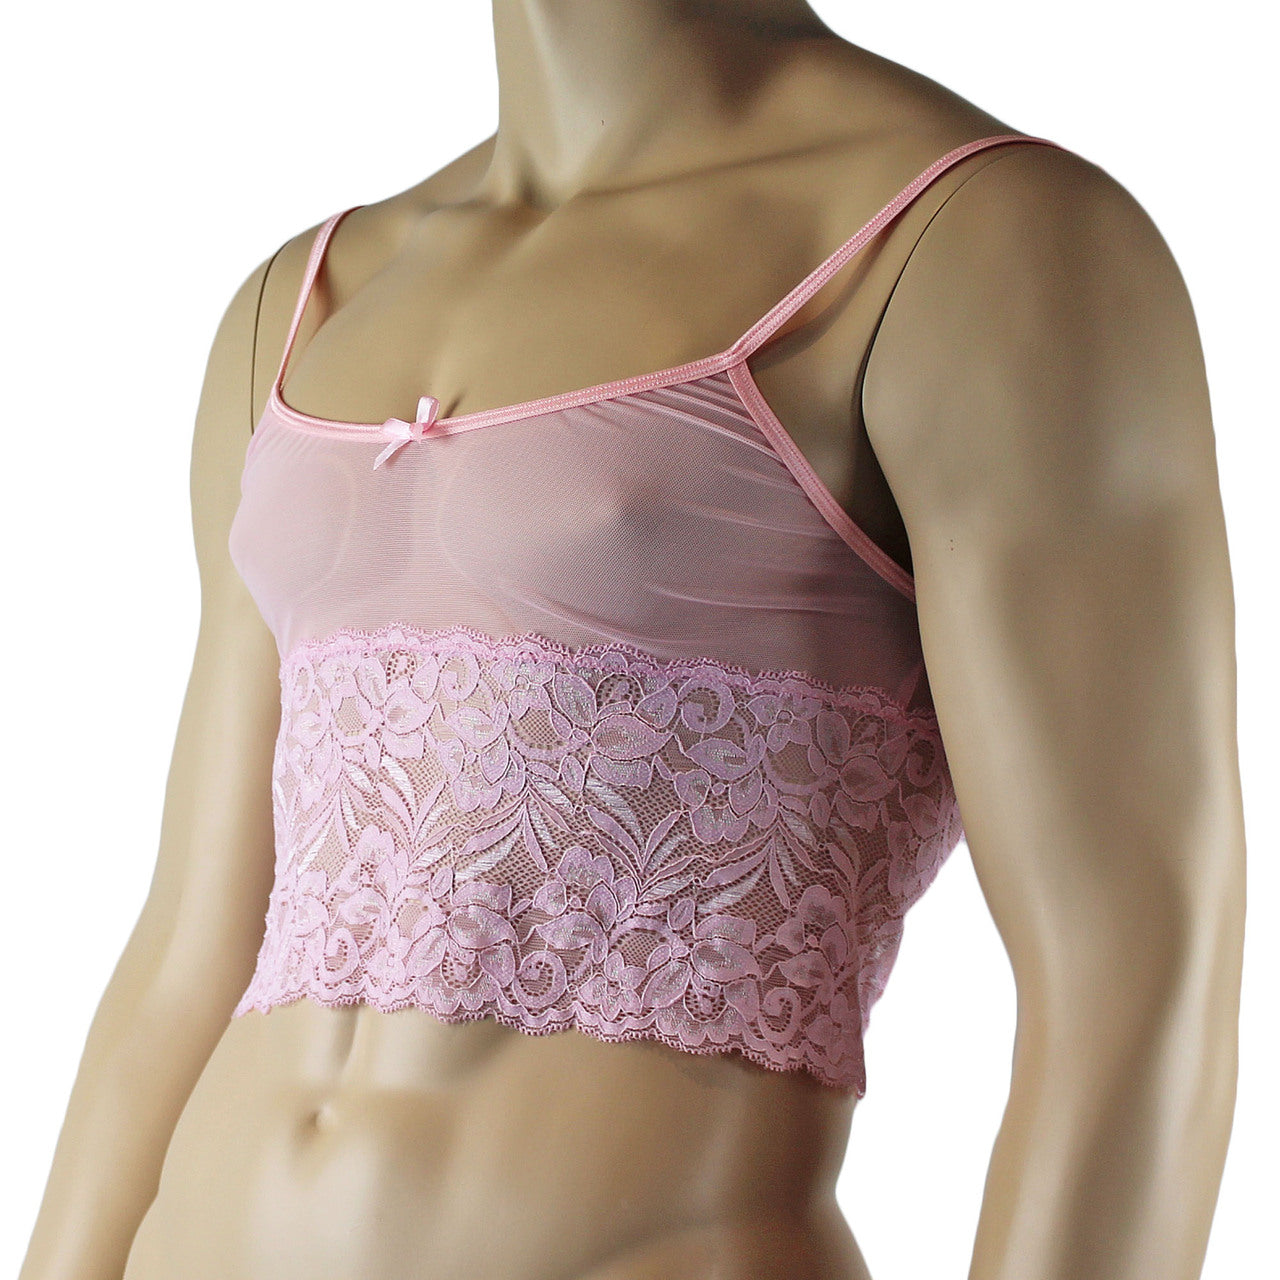 Mens Kristy Sexy Lace Camisole Top Male Lingerie Light Pink